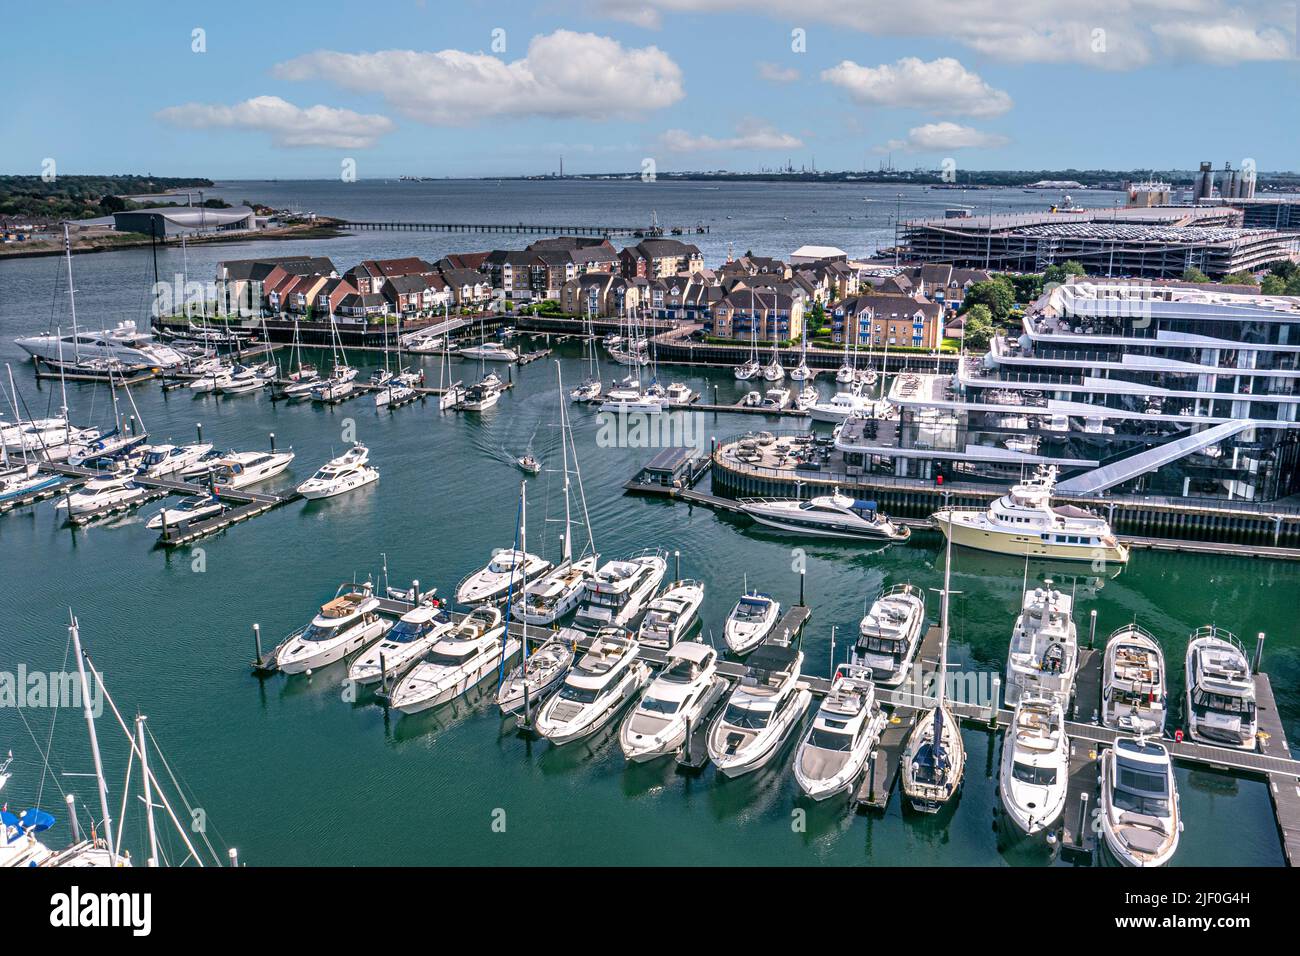 Ocean Village Southampton unique elevated view from Admirals Quay penthouse, luxury marina and yachts to The Isle of White Admirals Quay Hampshire UK Stock Photo